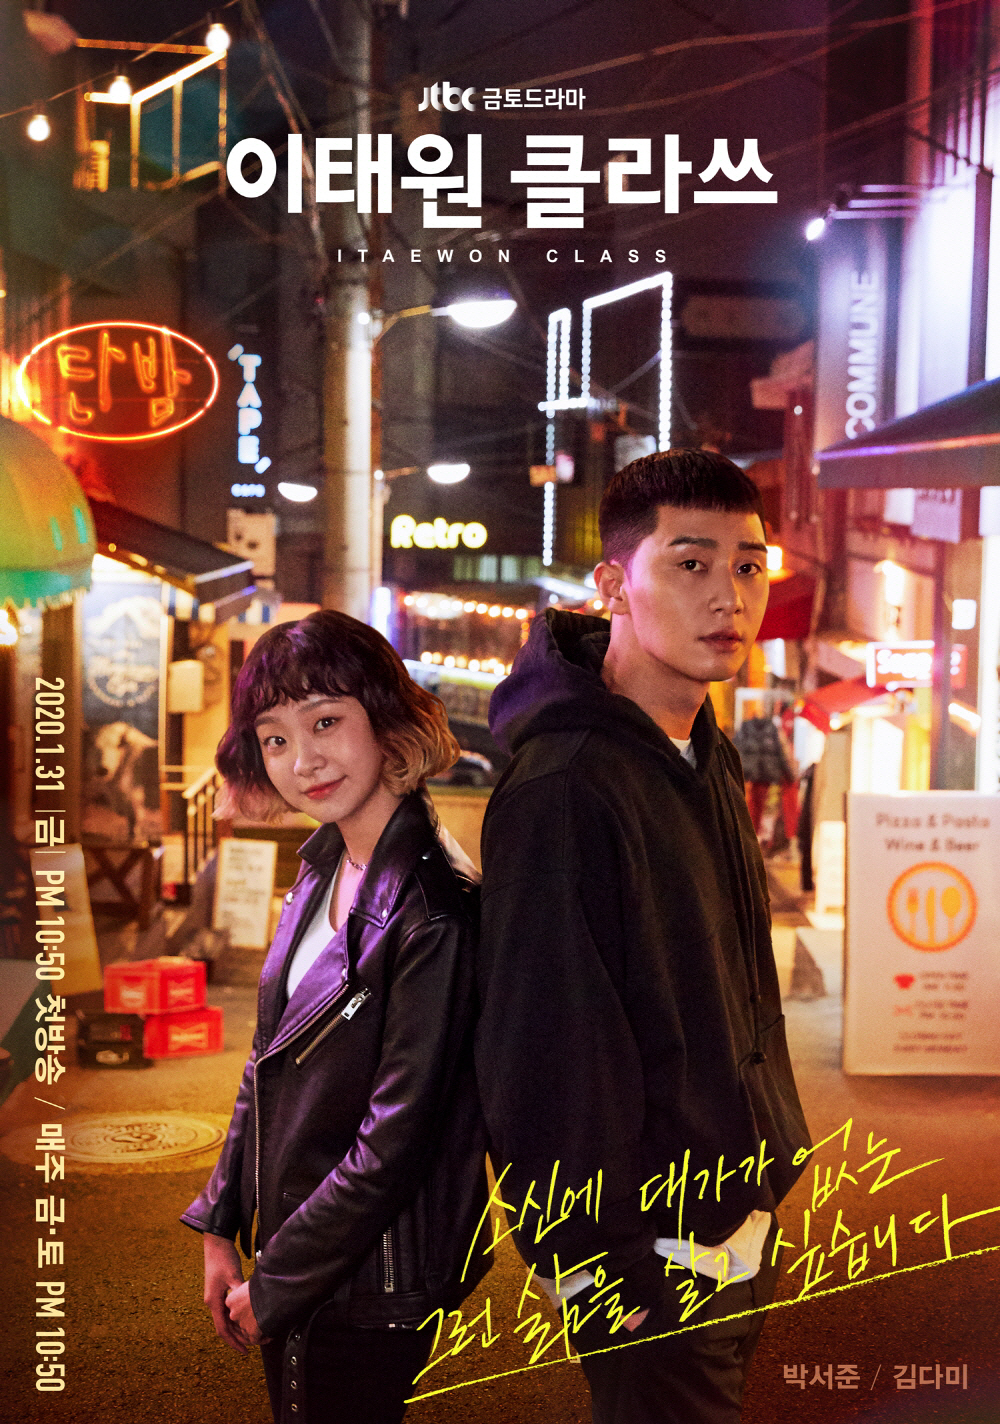 Itaewon Clath Park Seo-joon, Kim Da-mis class The other synergies make me excited.JTBCs new gilt drama Itaewon Clath (directed by Kim Seong-yoon, playwright Jo Kwang-jin, produced by Showbox and written by One, followed by Itaewon Clath), which will be broadcast first on the 31st following Chocolate on the 17th, Park Seo-joon and Kim Da-mis Itaewon Clath Youth Swegs Exploding Main Poster RevealedItaewon Clath is a work that depicts the hip rebellion of youths who are united in an unreasonable world, stubbornness and popularity.Their entrepreneurial myths, which pursue freedom with their own values ​​are dynamically unfolded in the small streets of Itaewon, which seems to have compressed the world.The next Web toon with a lot of enthusiasts is one of the most anticipated works in the first half of 2020, completing the irreplaceable lineup of Park Seo-joon, Kim Da-mi, Yoo Jae-myeong and Kwon Na-ra.Park Seo-joon and Kim Da-mis UNIQ and hip atmosphere in the main poster, which was released on the day, catches the eye.The smile of the two people standing on the street with the neon sign light brightens the night of Itaewon.Park Seo-joon emits the hot energy of youth with a hard eye on the short chestnut head, the trademark of Roy.Kim Da-mi matches all black leather jackets to maximize the chic charm of Joy Seo, which is equipped with dark charisma in freewheeling.The phrase I want to live such a life without a price in Xiao Xin adds to the Itaewon receptionist of Park Seo-joon.Attention is drawn to the dreams and challenges of the enthusiastic youths that Roy and Joy (Kim Da-mi), and the Sweet Night family will draw together.Park Seo-joon is a straight-line young man who has been accepting Itaewon with one Xiao Xin, and is in charge of the life character renewal.It is expected that the unfavorable counterattack against the large corporation Jangga of the food service industry will provide a pleasant cider.Kim Da-mi, a popular newcomer, plays the high intelligence sociopath Joy with a god-like brain.As a manager of Sanbam, I will work with Park Roy and will be a genius helper.There is also a keen interest in the synergy between Park Seo-joon and Kim Da-mi, which are equipped with unique charm and acting power.Park Seo-joon said, I have been shooting fun because my breathing is well suited as I have known before.It seems to lead to a natural comfortable breathing because it perfectly expresses the charm of Joy Seo character. Kim Da-mi also said, I feel the hard side of Roy in the eyes of Park Seo-joon Actor.I feel like I am really Joy when I am Acting together, he added. I am giving a lot of consideration to concentrate on Acting on the spot. Park Seo-joon, Kim Da-mis color added to Roy and Joy Seo is what the two people are already looking forward to.The UNIQ combination of Park Seo-joon and Kim Da-mi is a point where you can feel another charm with One, said the production team of Itaewon Clath. Real editions Roy, Joy, you can expect more chemistry than two people who have transformed themselves.On the other hand, Itaewon Clath is the first production drama of Showbox that has shown films with workability and popularity such as Taxi Driver, Assassination and Tunnel.Director Kim Seong-yoon, who has been recognized for his sensual performance through Gurmigreen Moonlight and Discovery of Love, catches megaphone and one writer Jo Kwang-jin writes the script directly and collects expectations.It will be broadcast first on JTBC at 10:50 pm on the 31st (Friday) following Chocolate.